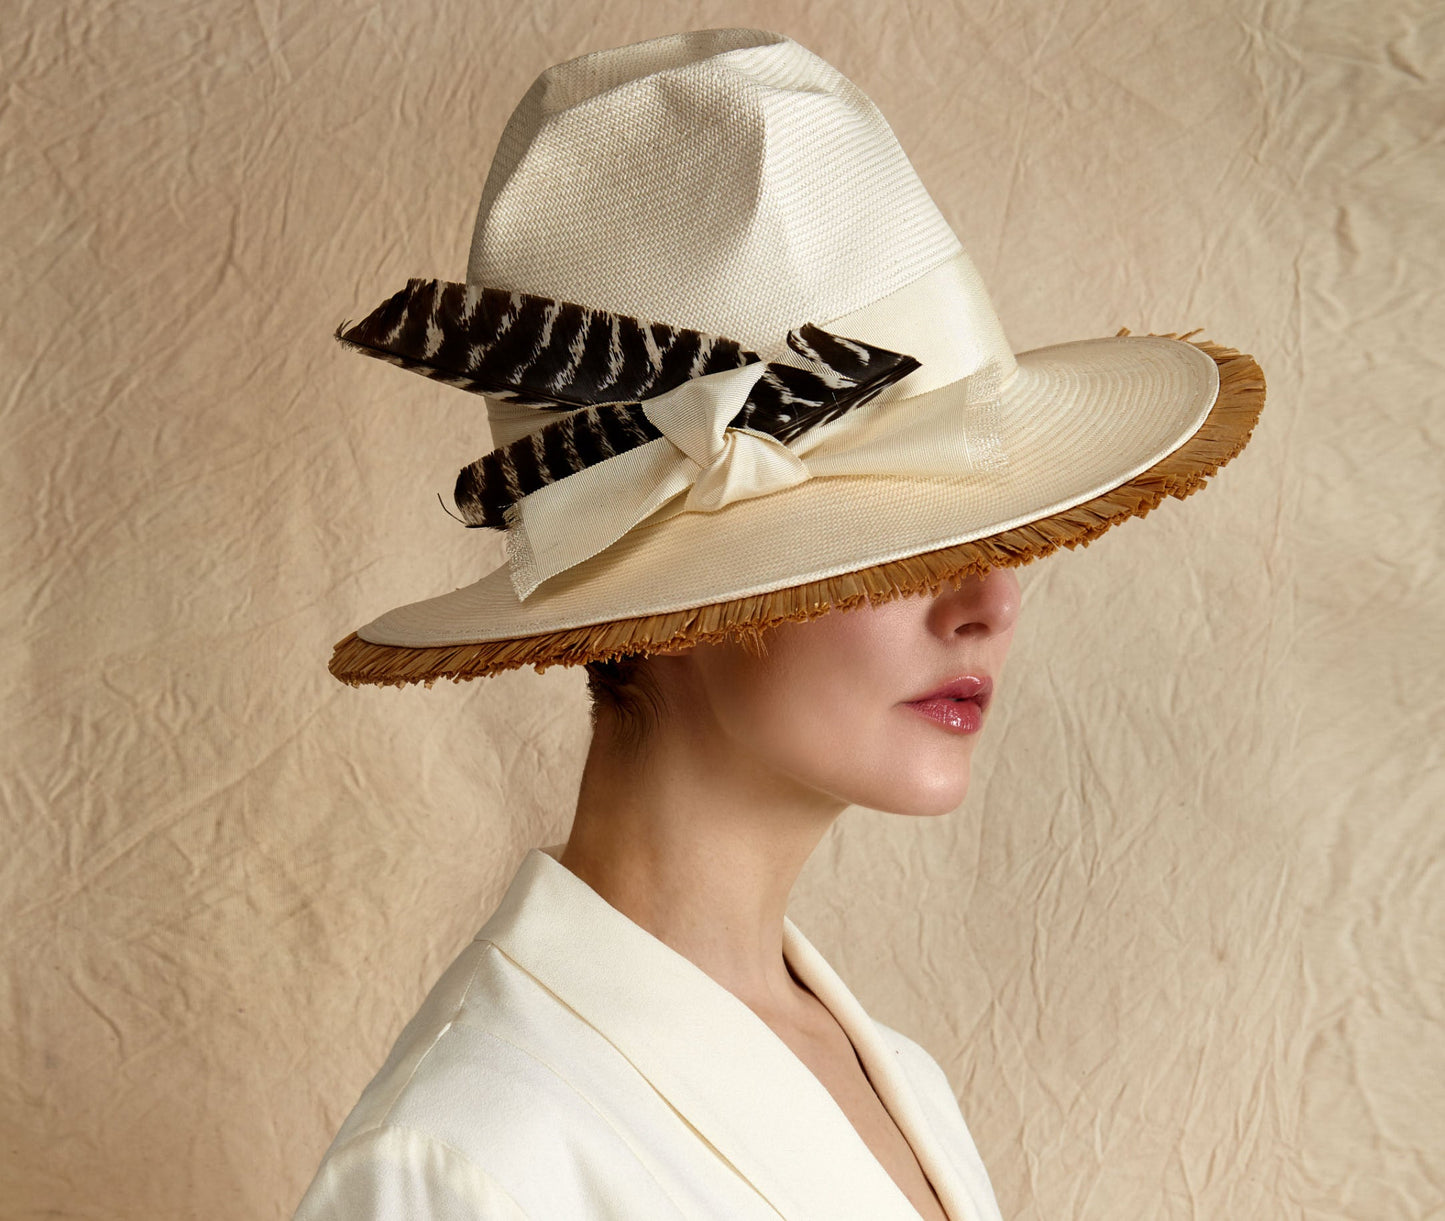 Parker Shantung Straw Hat made-to-order from Cha Cha's House of Ill Repute